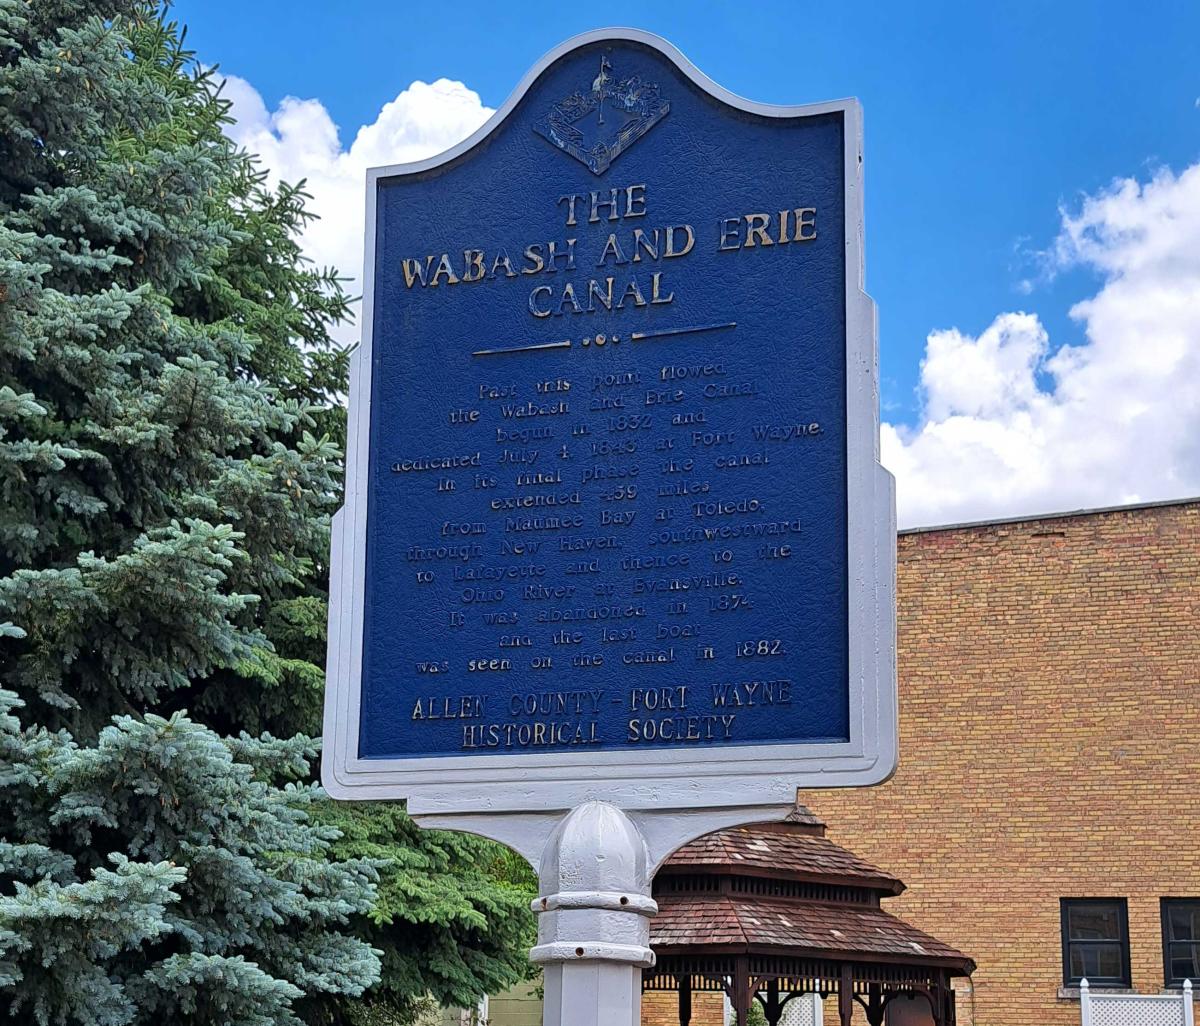 Blue, patinaed commemorative plaque at New Haven Canal Landing Park that says, "The Wabash and Erie Canal"